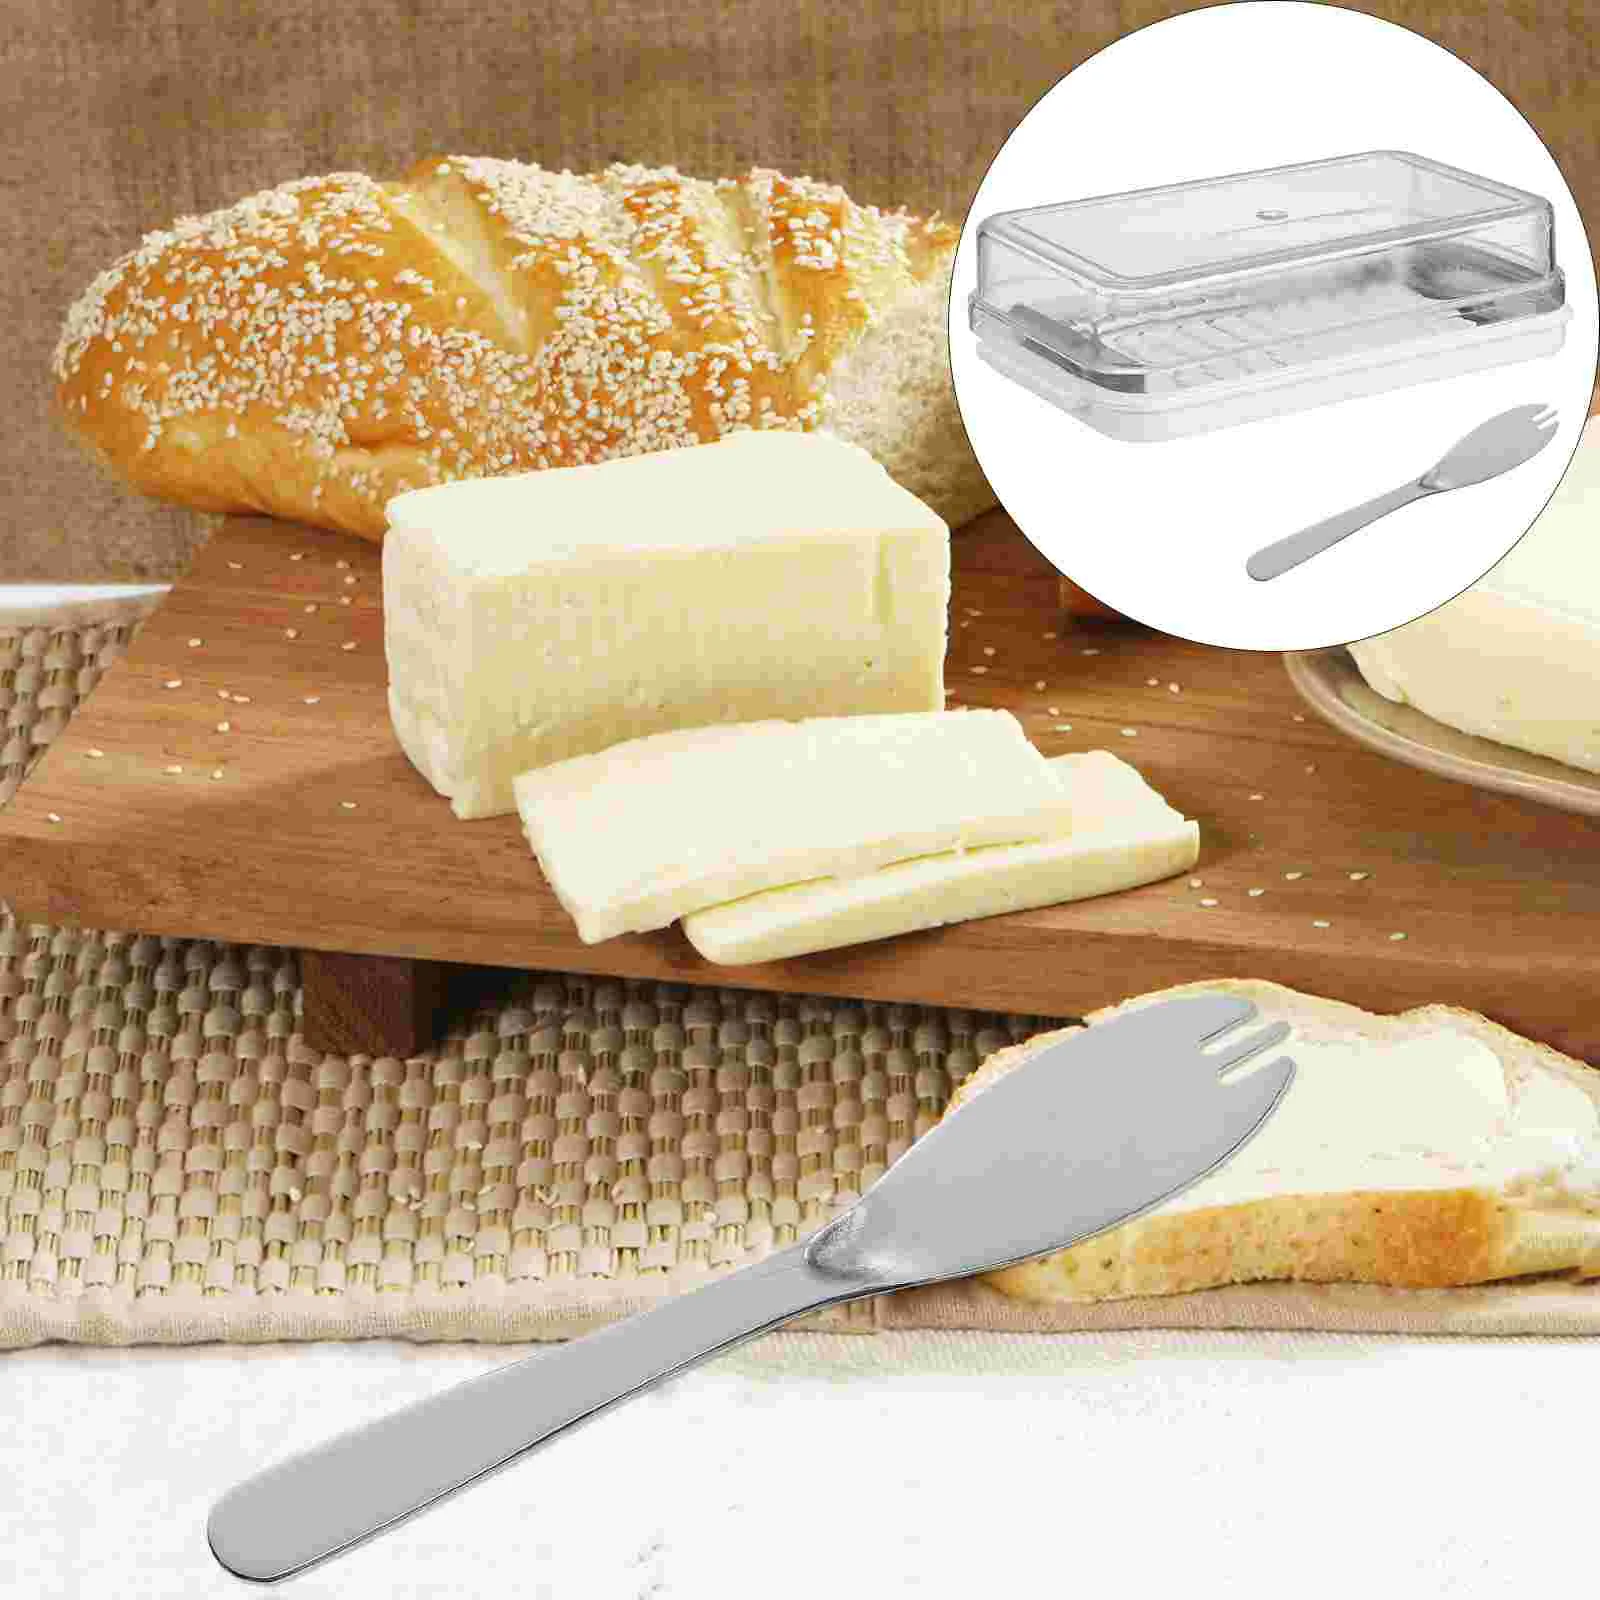 

Butter Dish Box Keeper Lid Cheese Storage Container Covered Plate Metal Holder Slicer French Serving Cover Crisper Kitchen Lids